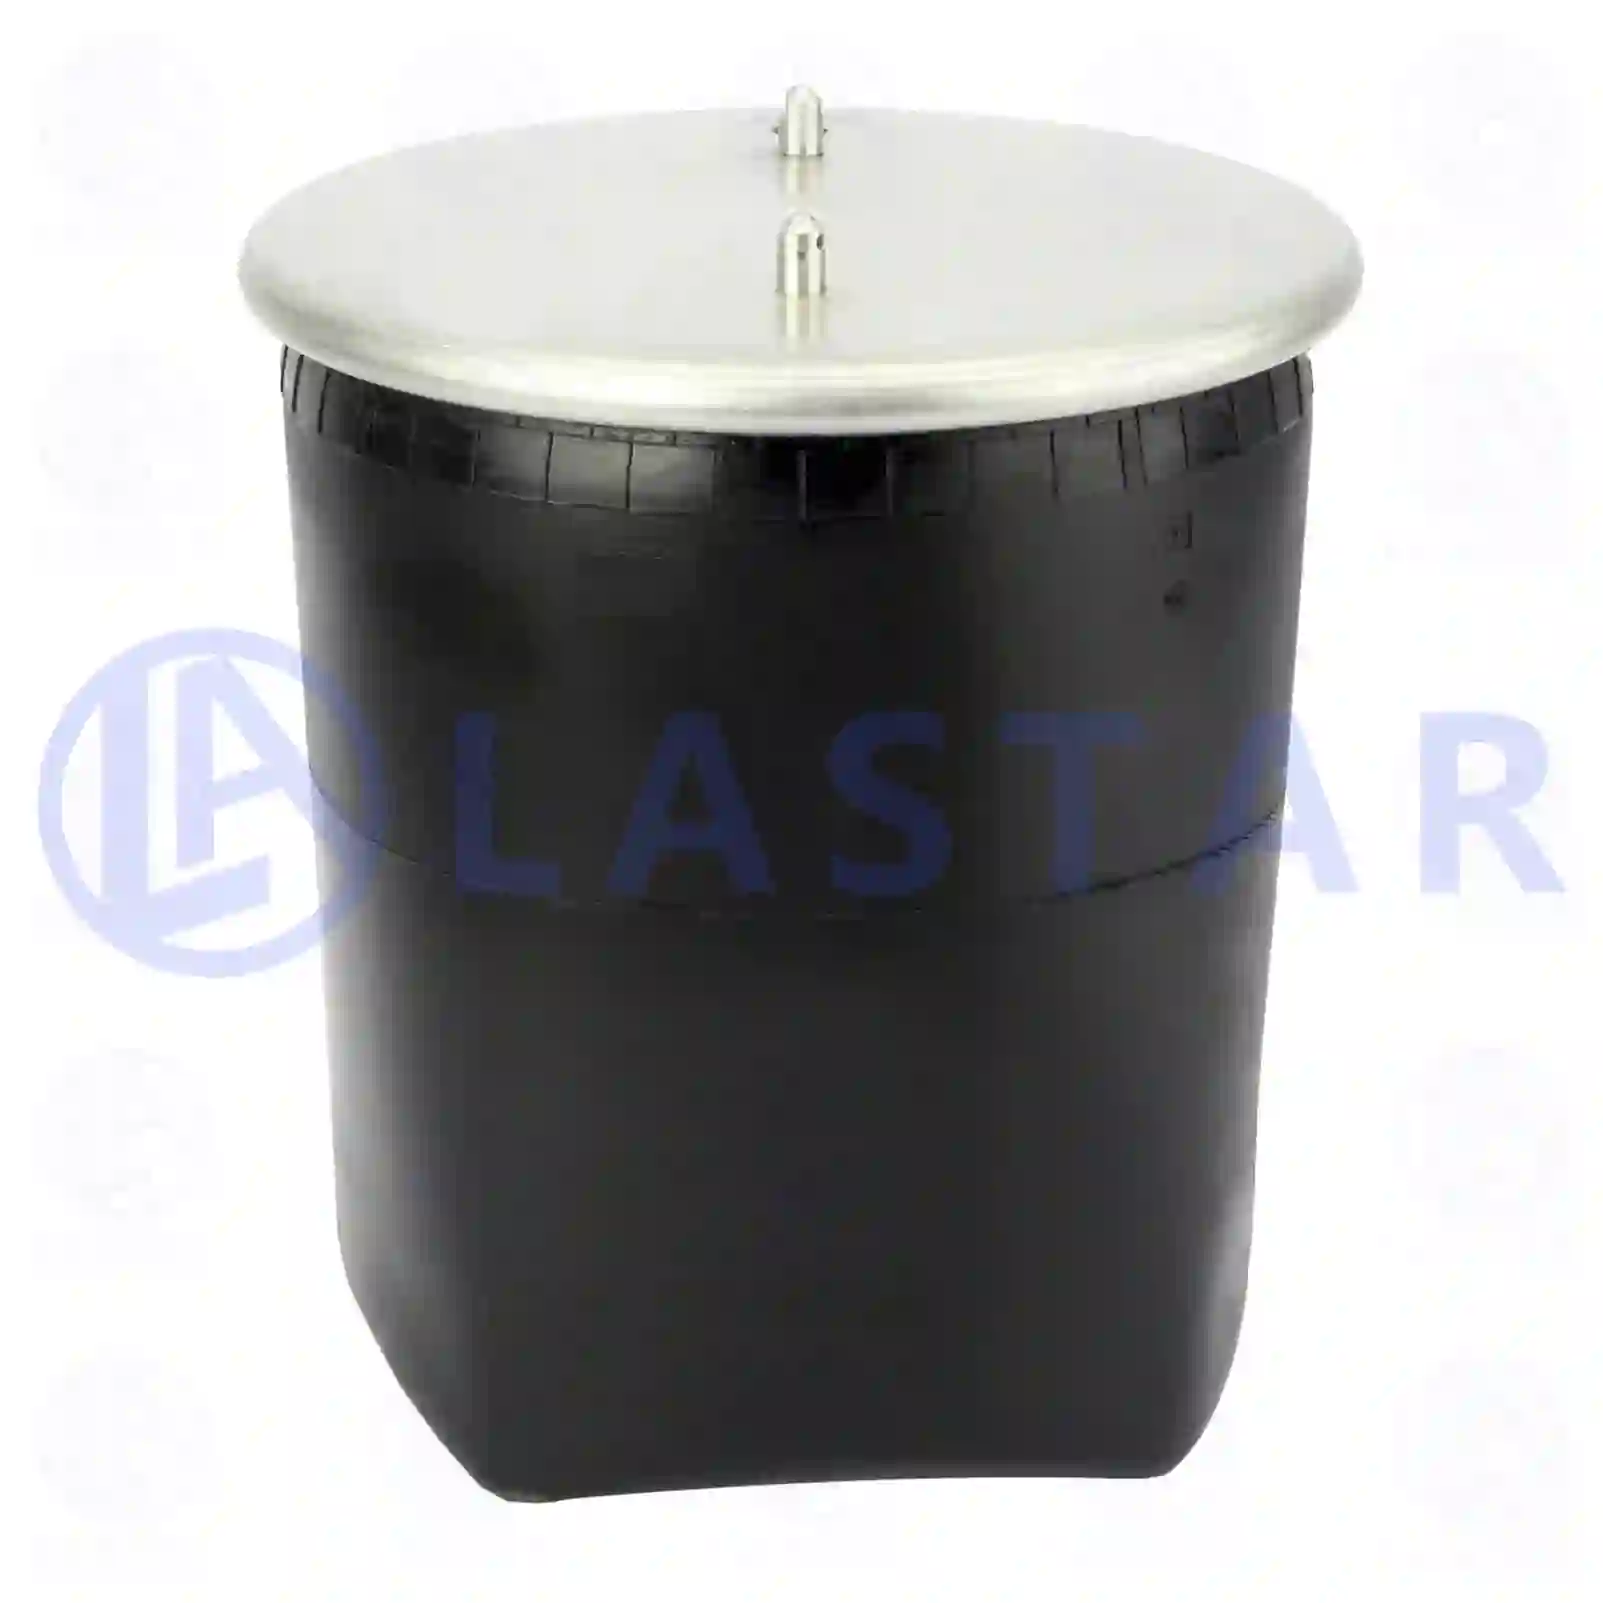 Air spring, without piston, 77730133, 1379393, 1422751, 1439284, ||  77730133 Lastar Spare Part | Truck Spare Parts, Auotomotive Spare Parts Air spring, without piston, 77730133, 1379393, 1422751, 1439284, ||  77730133 Lastar Spare Part | Truck Spare Parts, Auotomotive Spare Parts